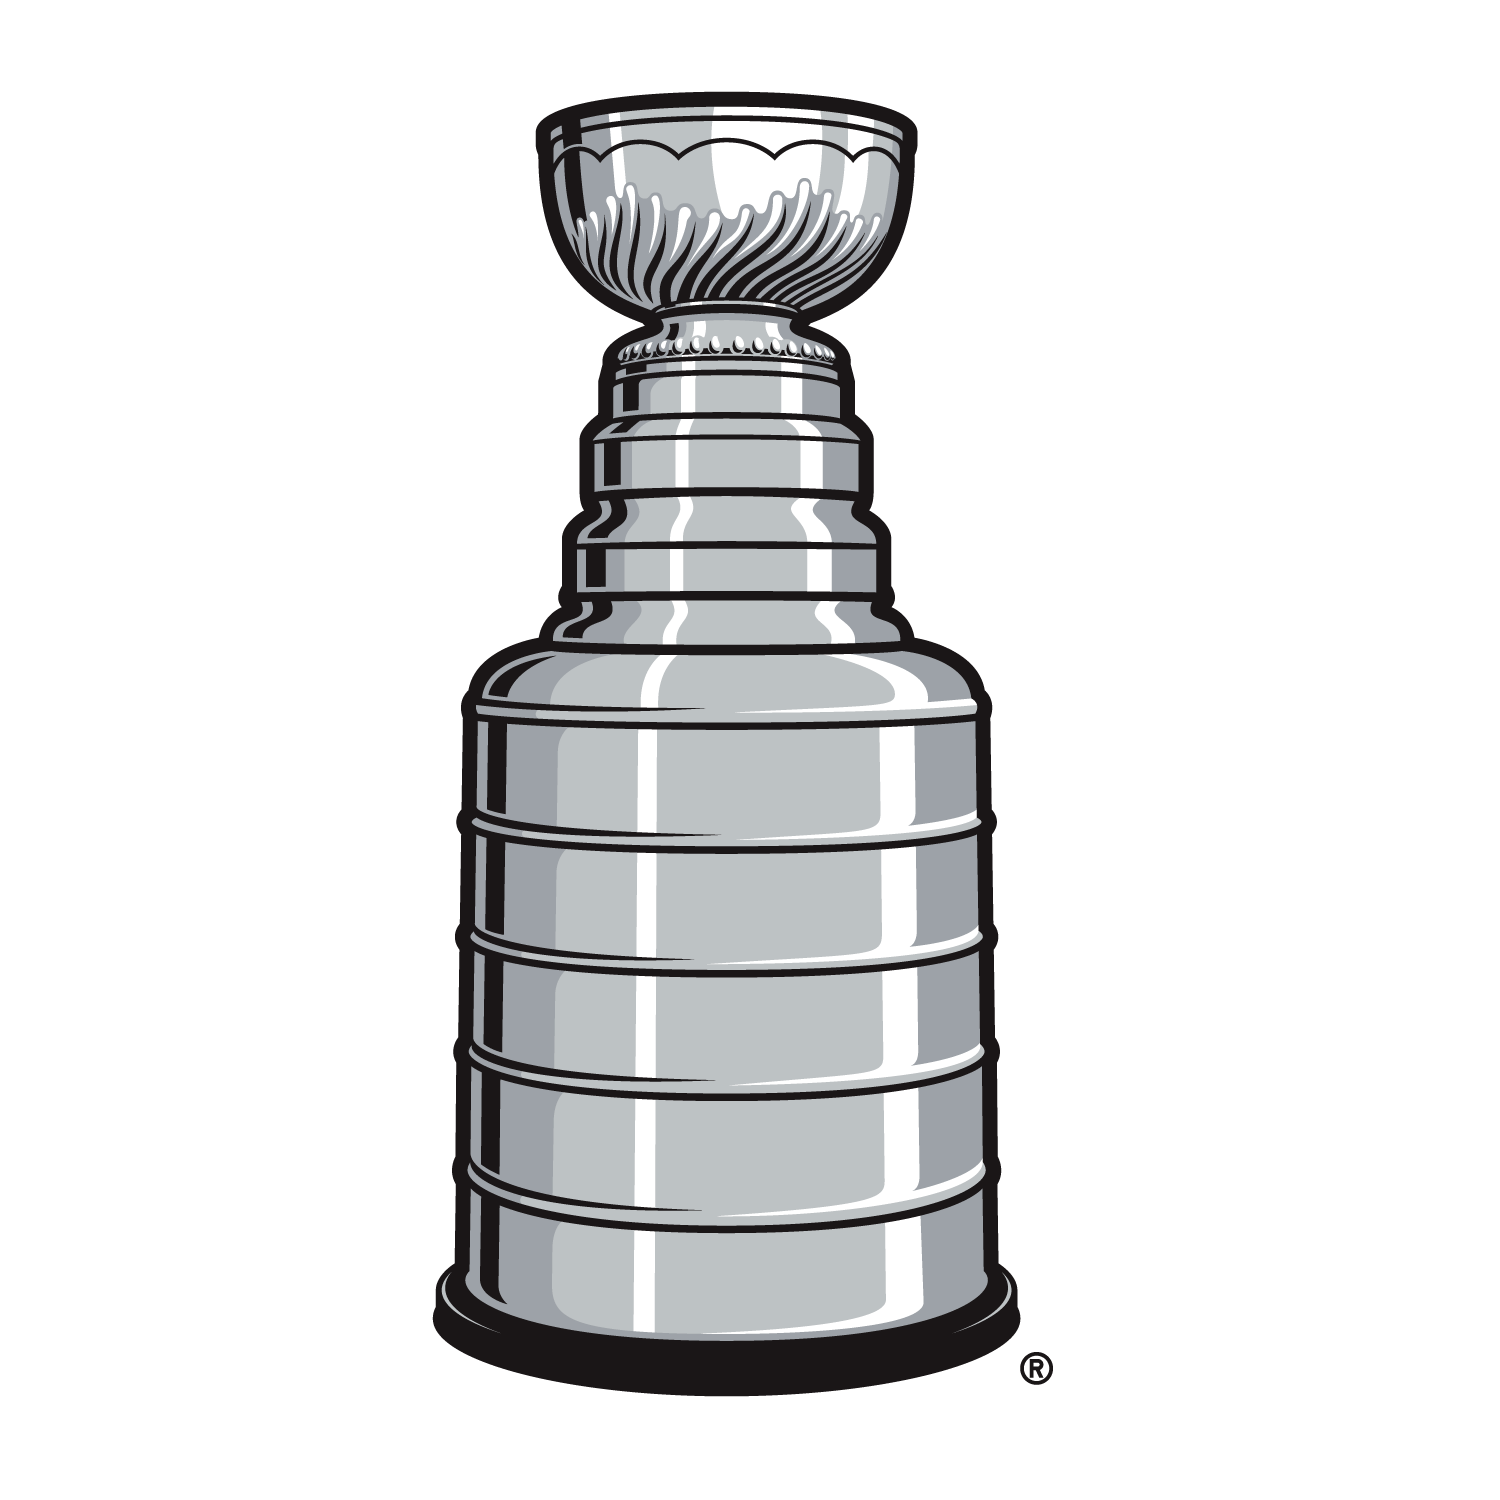 NHL on Twitter: "It's only fitting that the greatest trophy in all of